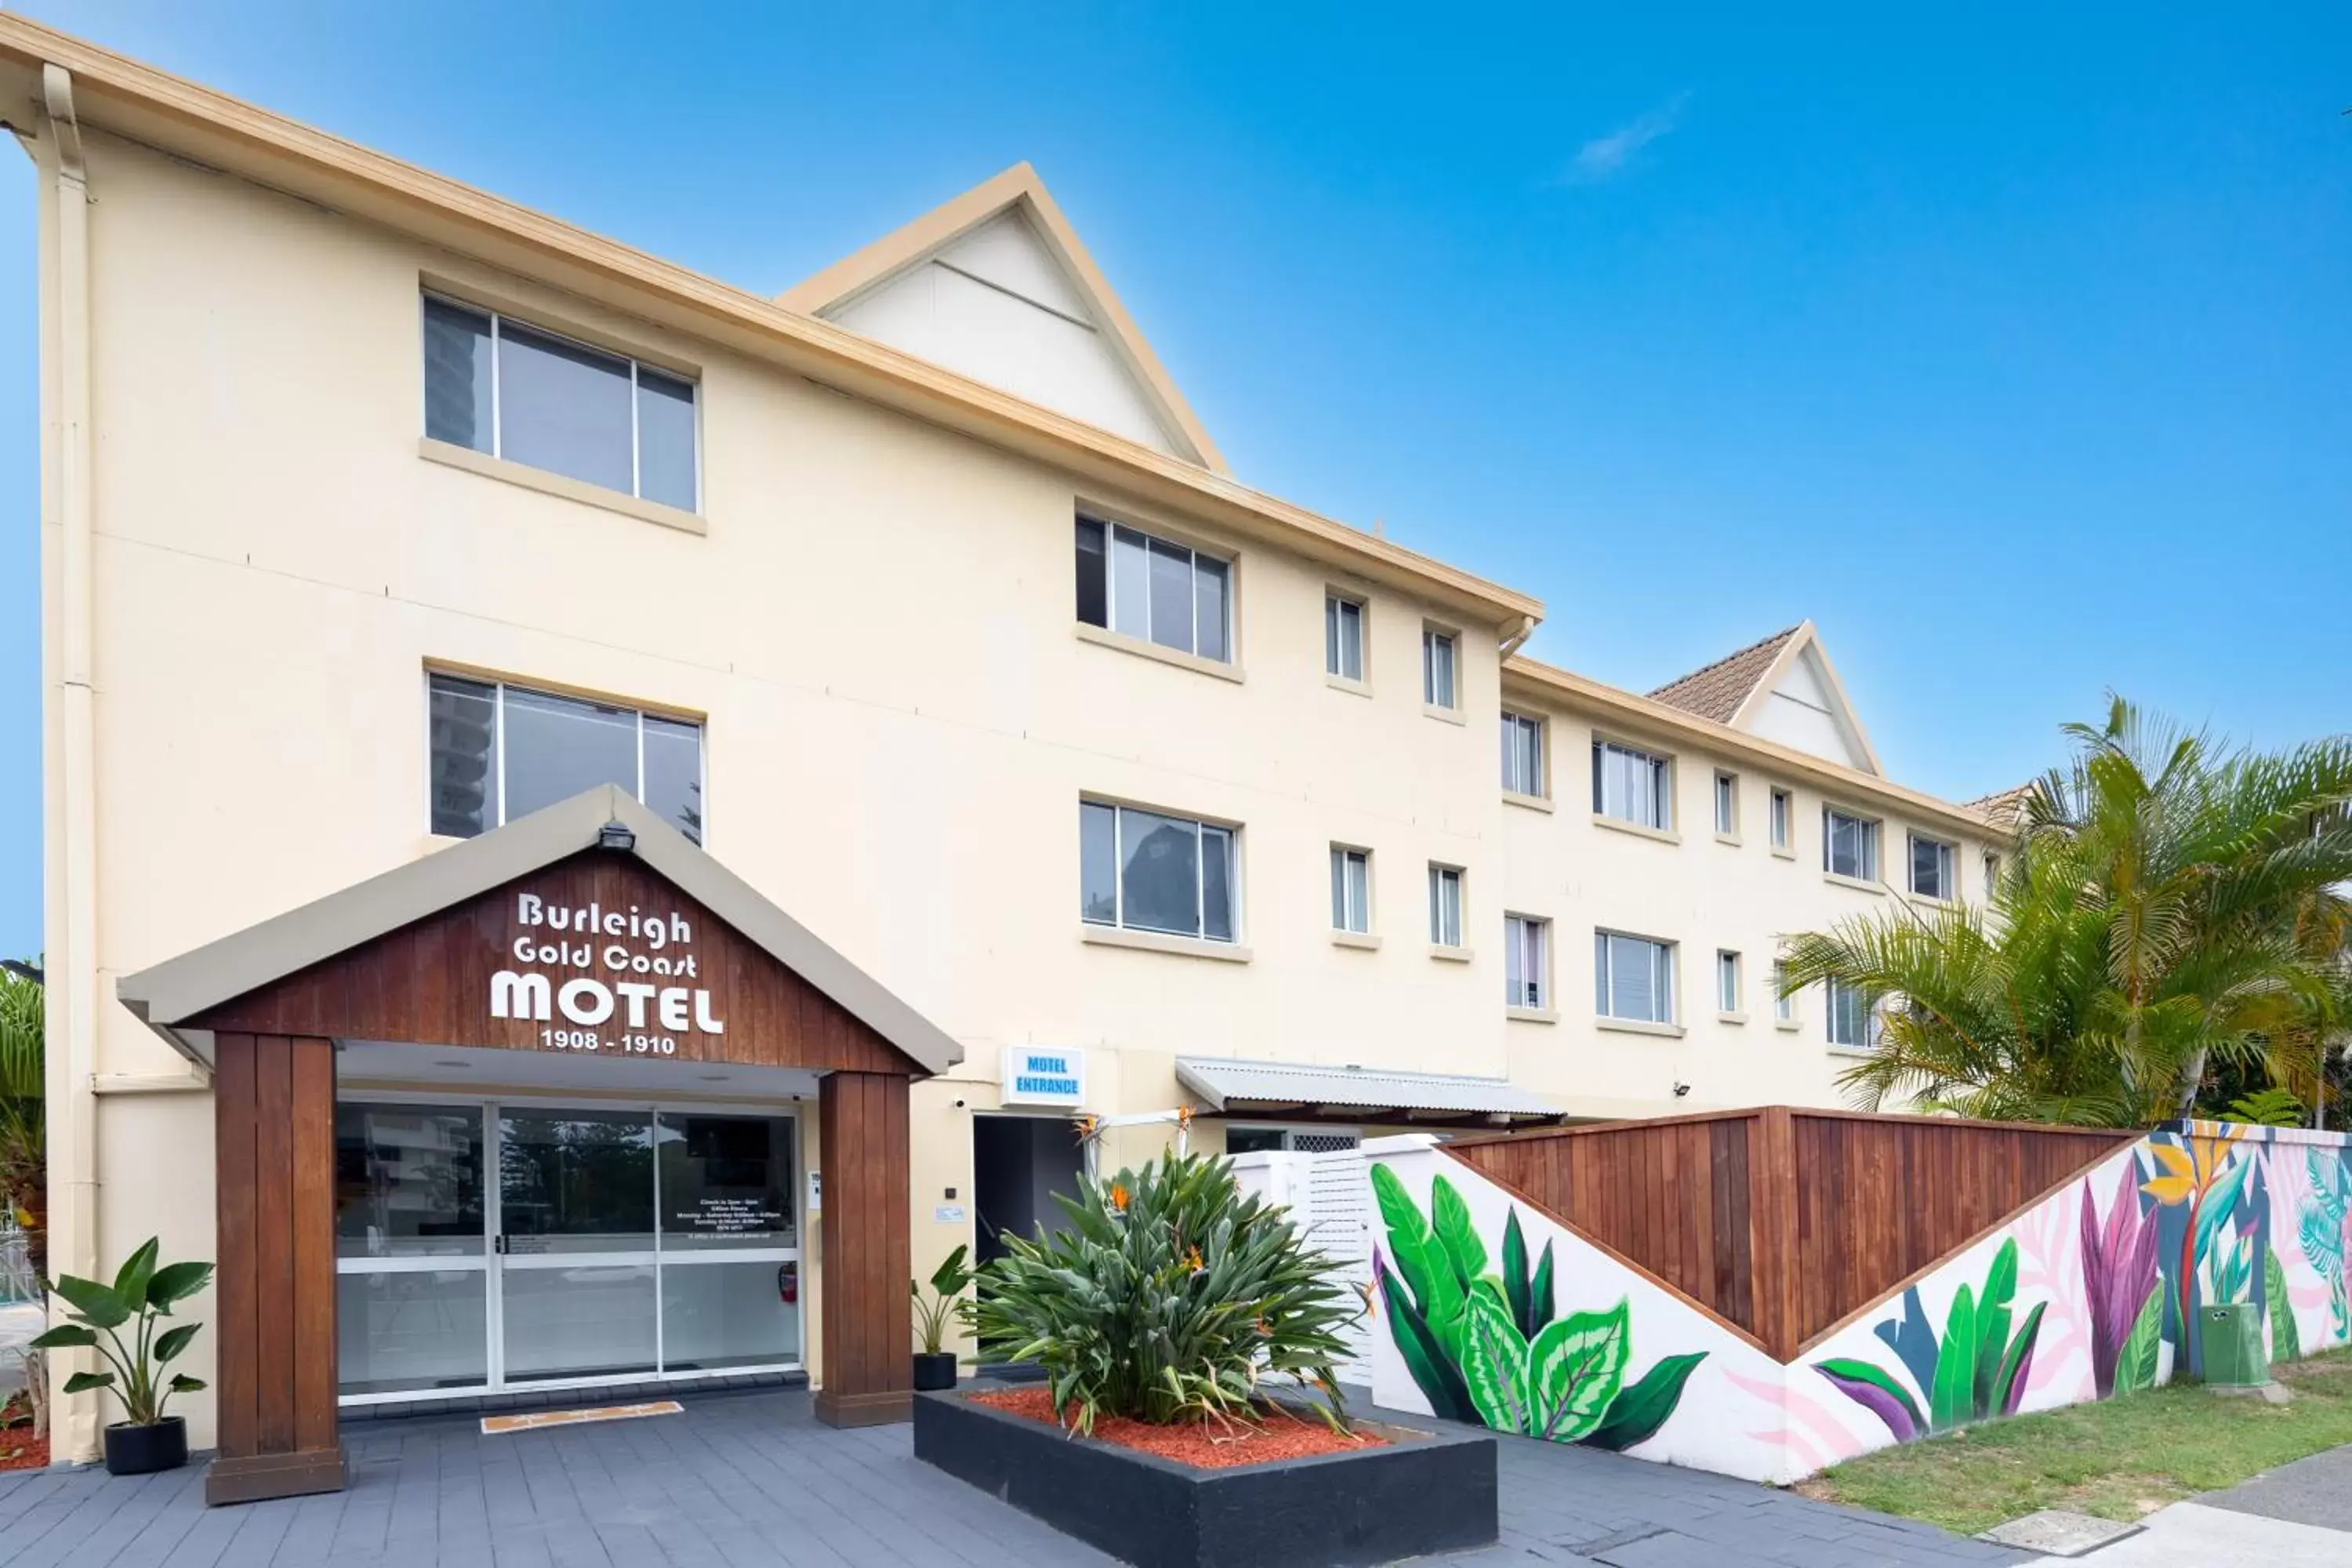 Property Building in Burleigh Gold Coast Motel